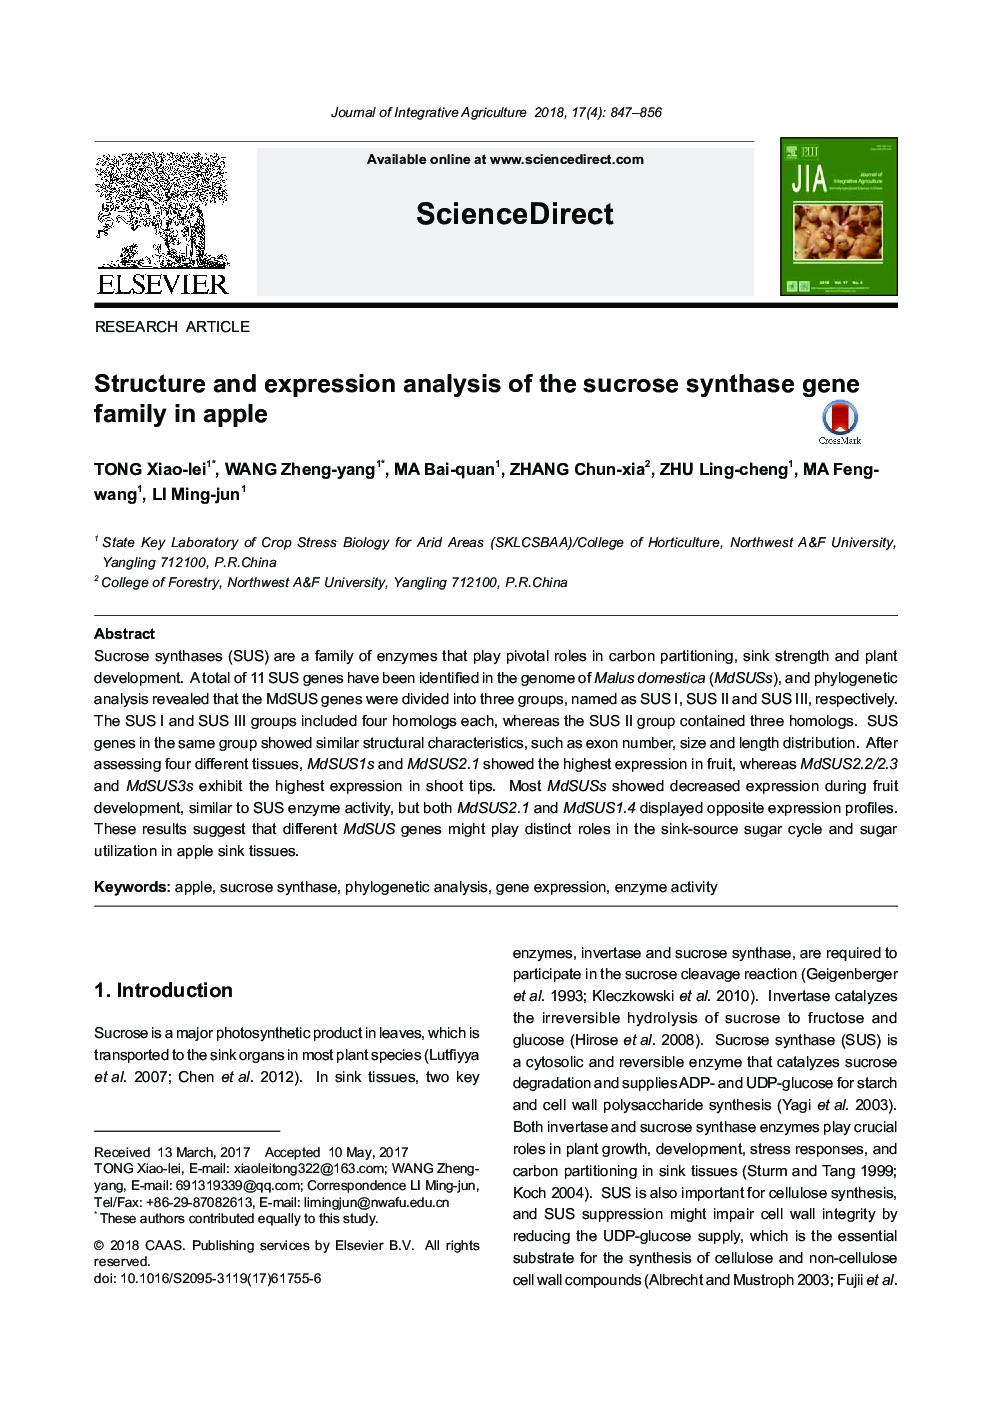 Structure and expression analysis of the sucrose synthase gene family in apple